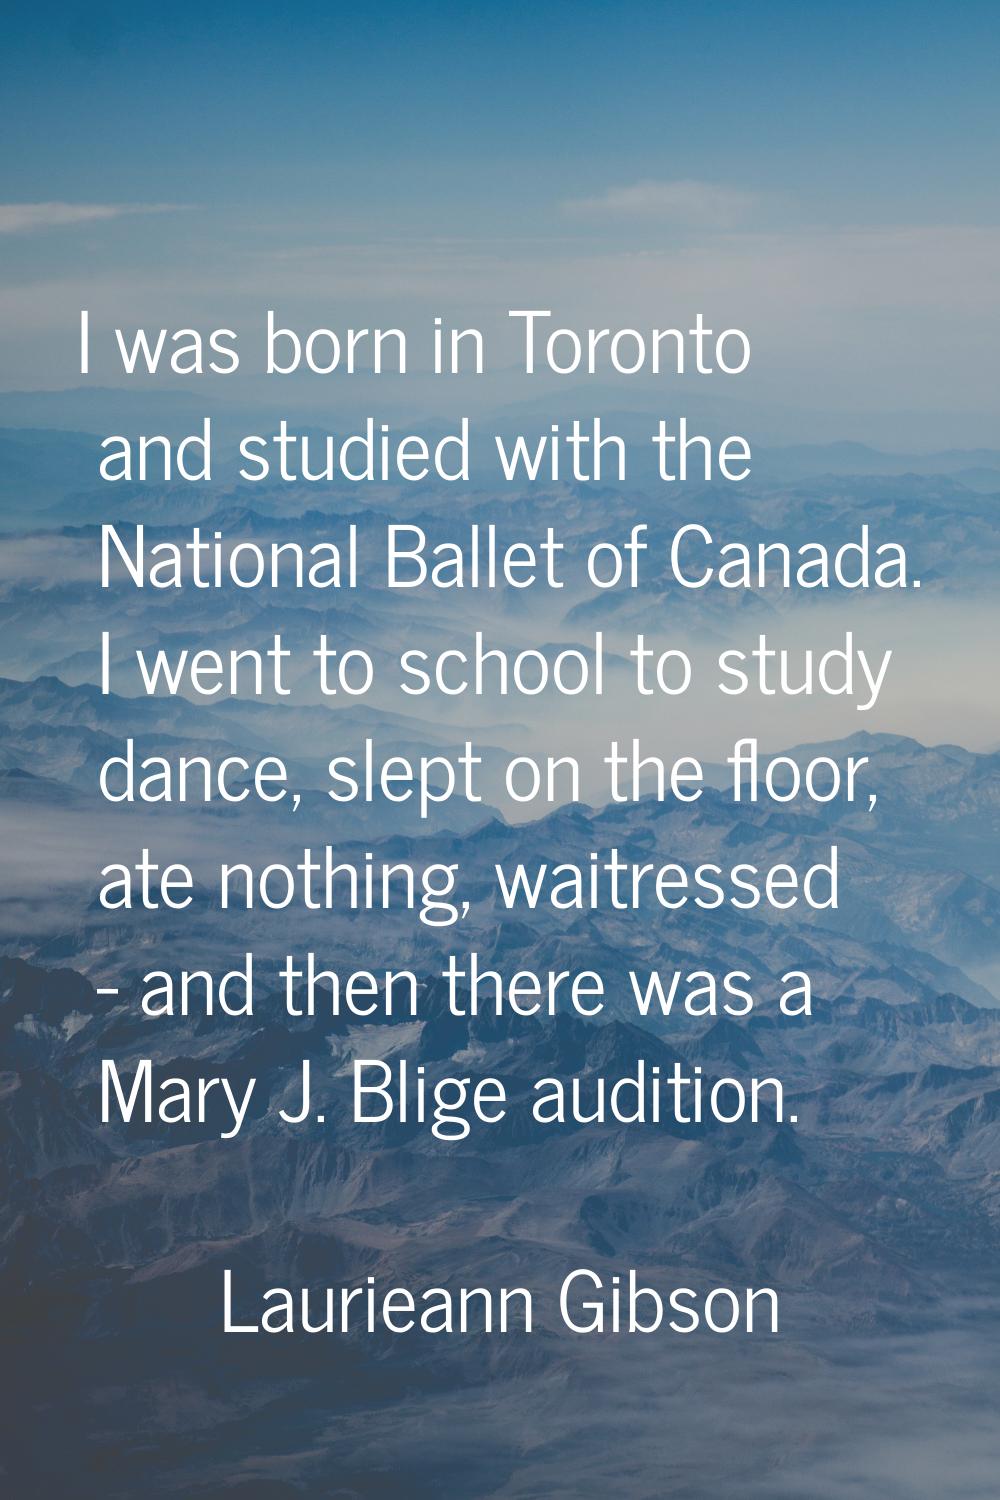 I was born in Toronto and studied with the National Ballet of Canada. I went to school to study dan